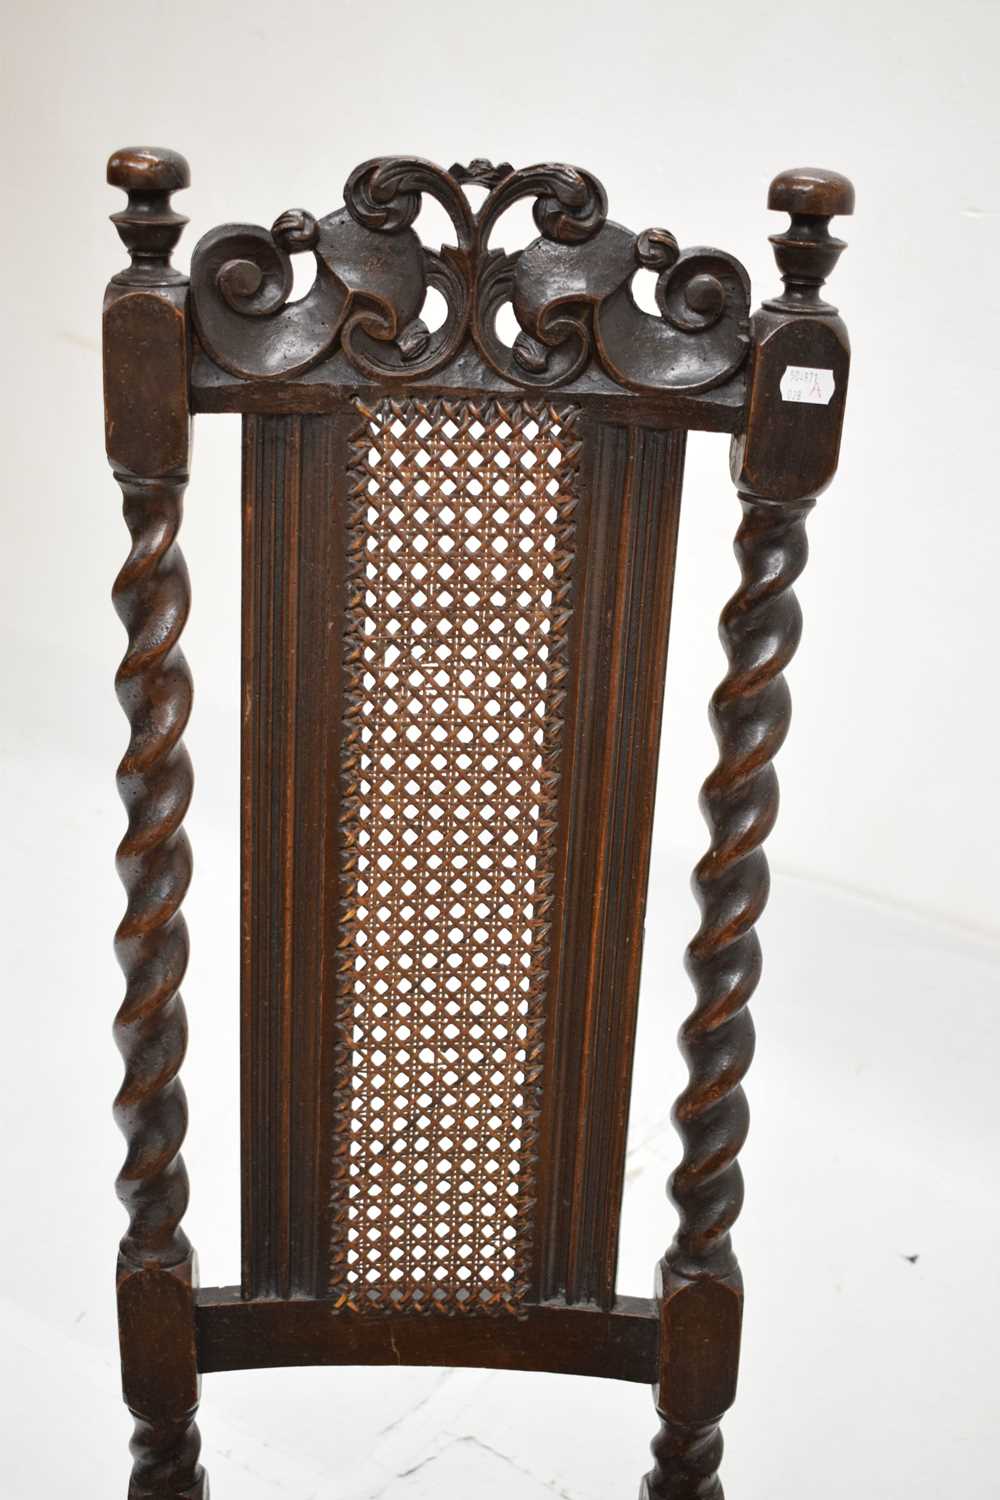 Late 17th century walnut and cane high-back chair - Image 3 of 15